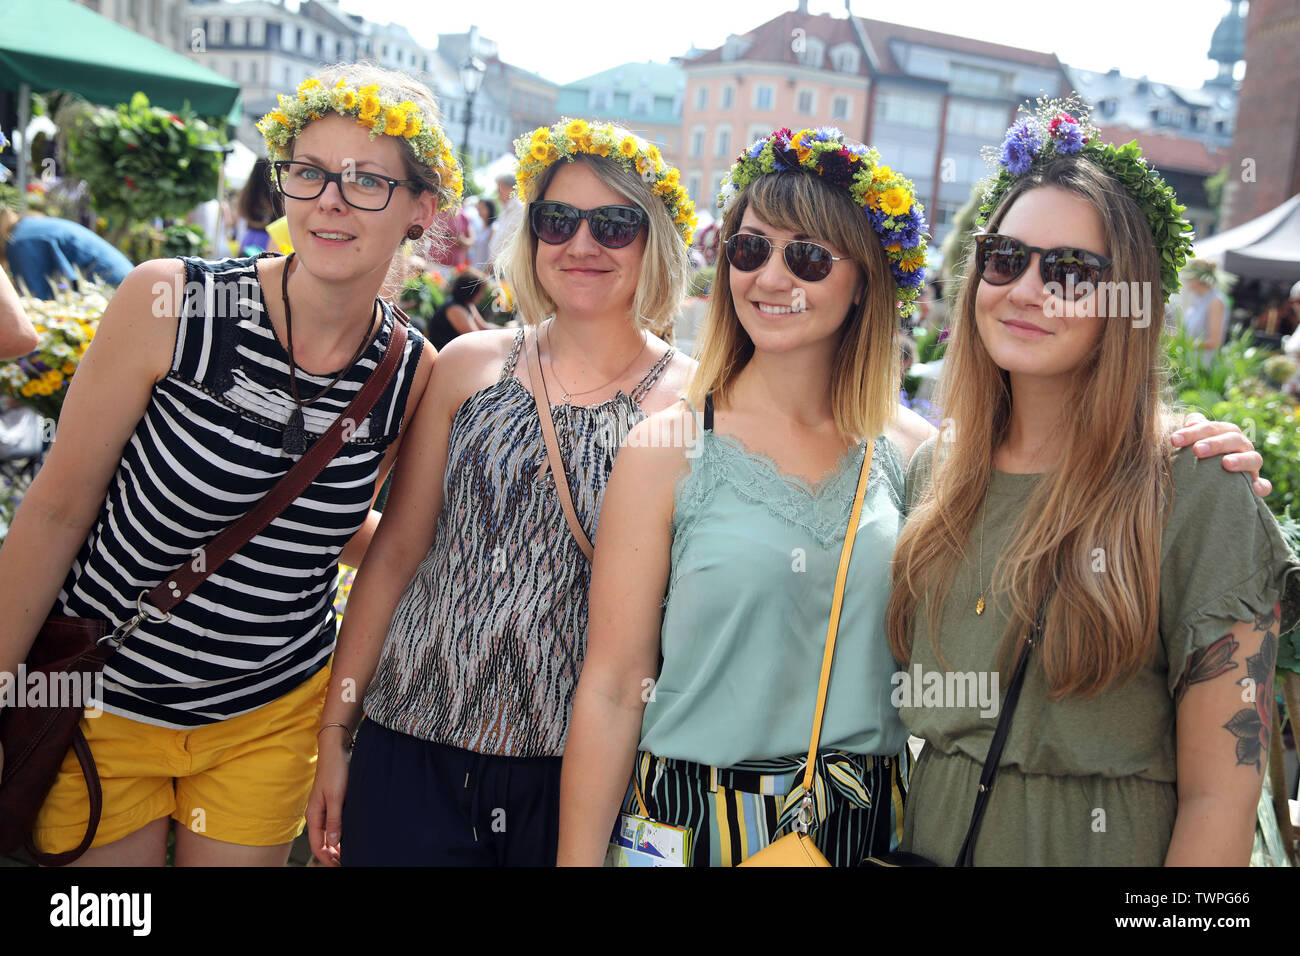 Riga, Latvia. 21st June, 2019. Women wearing flower crowns pose for photos  during the Midsummer festival Ligo market in Riga, Latvia, June 21, 2019.  The annual Midsummer festival Ligo market opened here